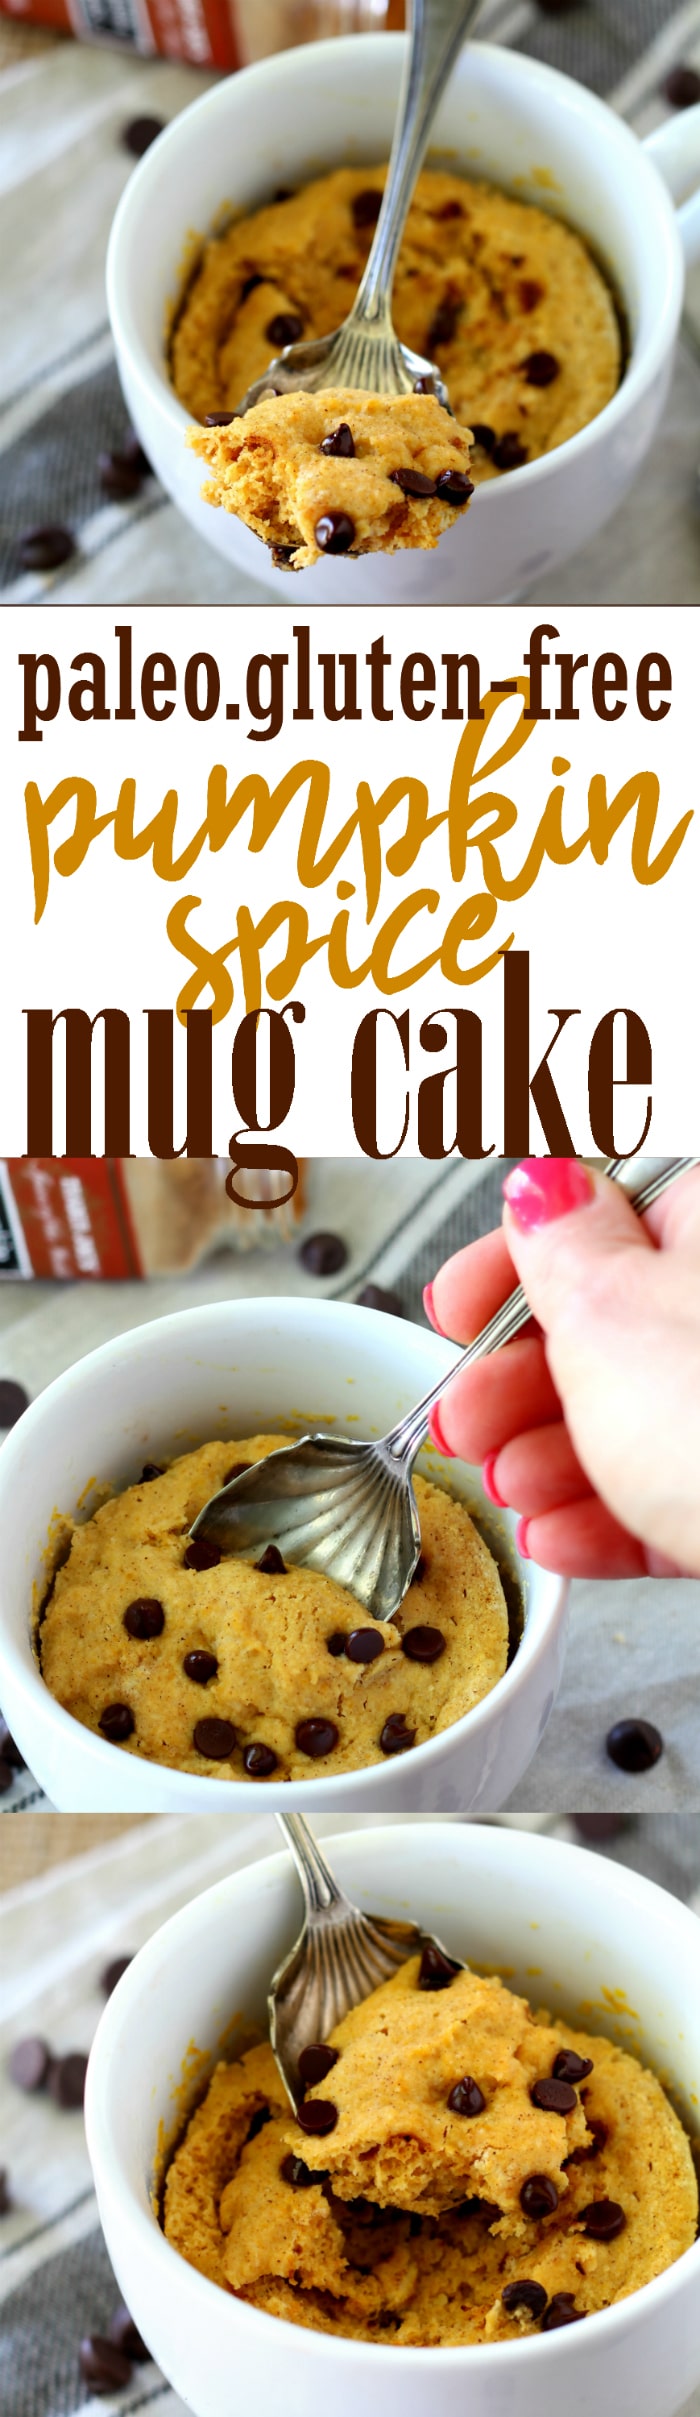 This Paleo Gluten-Free Pumpkin Spice Mug Cake is so tender and delicious that you'd never guess it is actually nutritious. Quick and easy, all you need is a mug, microwave and less than 5 minutes to whip up this tasty fall-inspired treat!